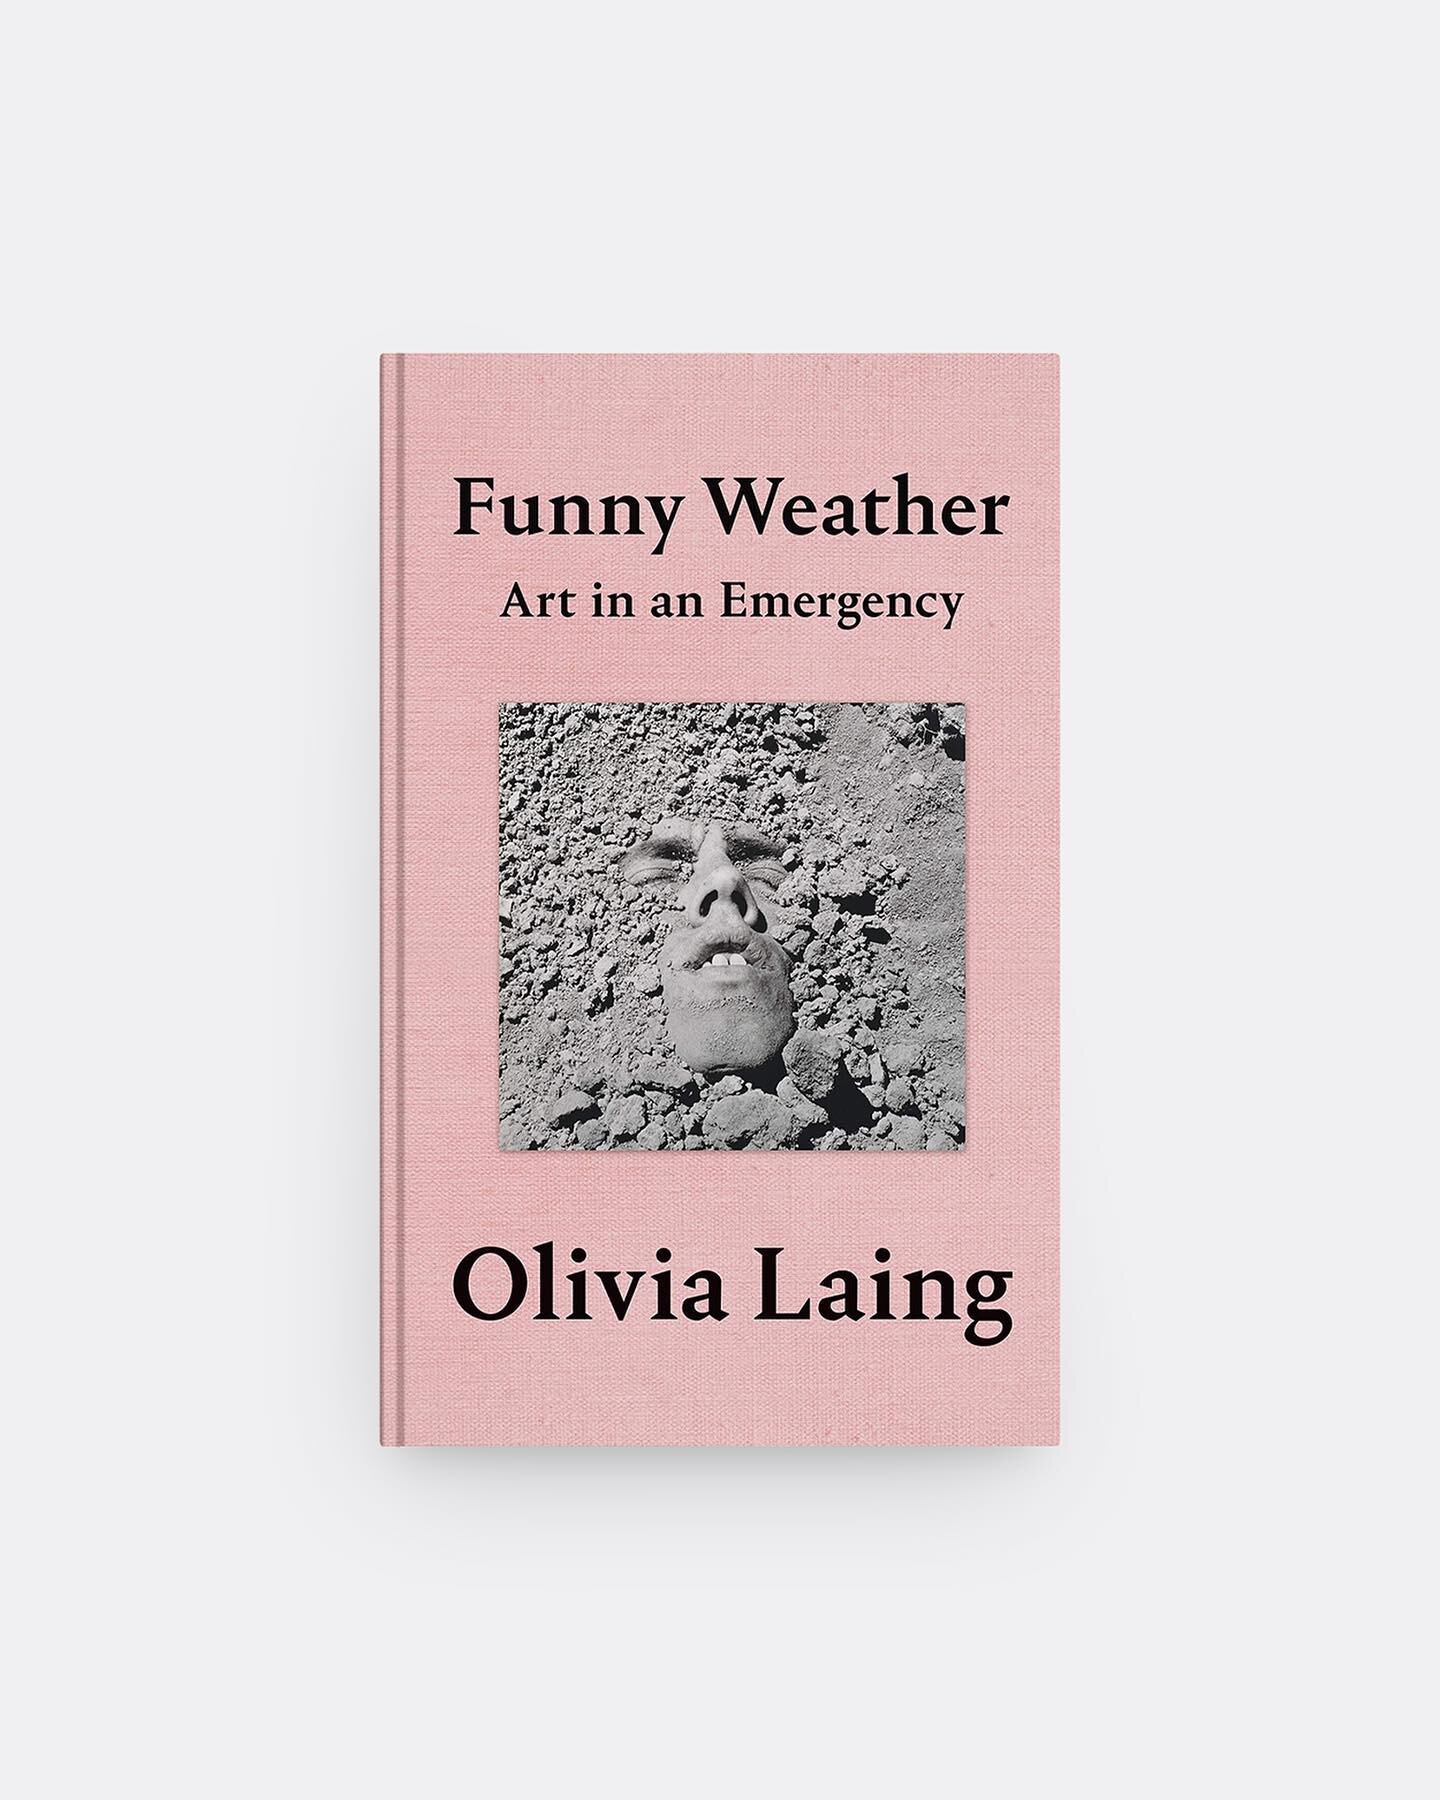 Last week we published the first in a series of book recommendation articles. As a spin-off, we invited writer Katy Nixon to review Olivia Laing&rsquo;s &lsquo;Funny Weather: Art in an Emergency&rsquo;.
⠀
&ldquo;This book brings together the signific